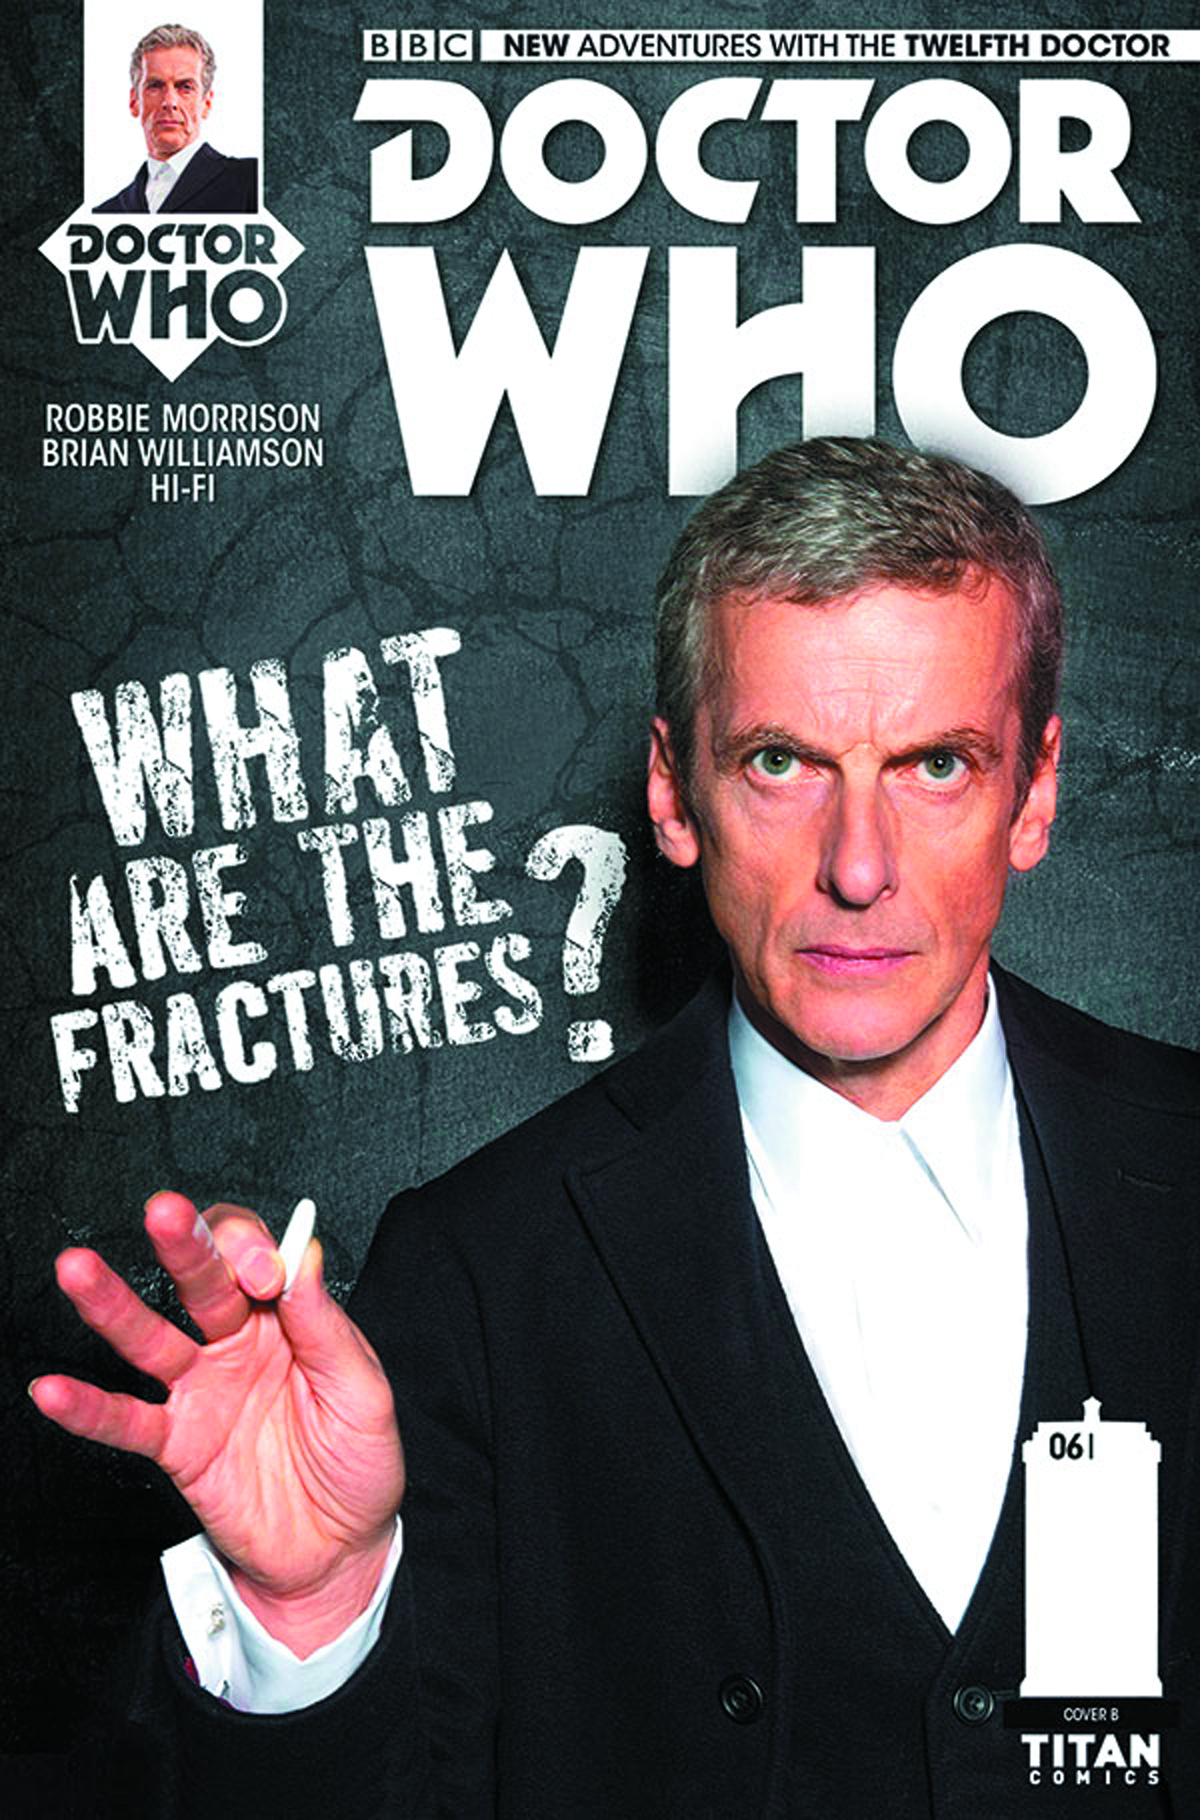 DOCTOR WHO 12TH #6 SUBSCRIPTION PHOTO